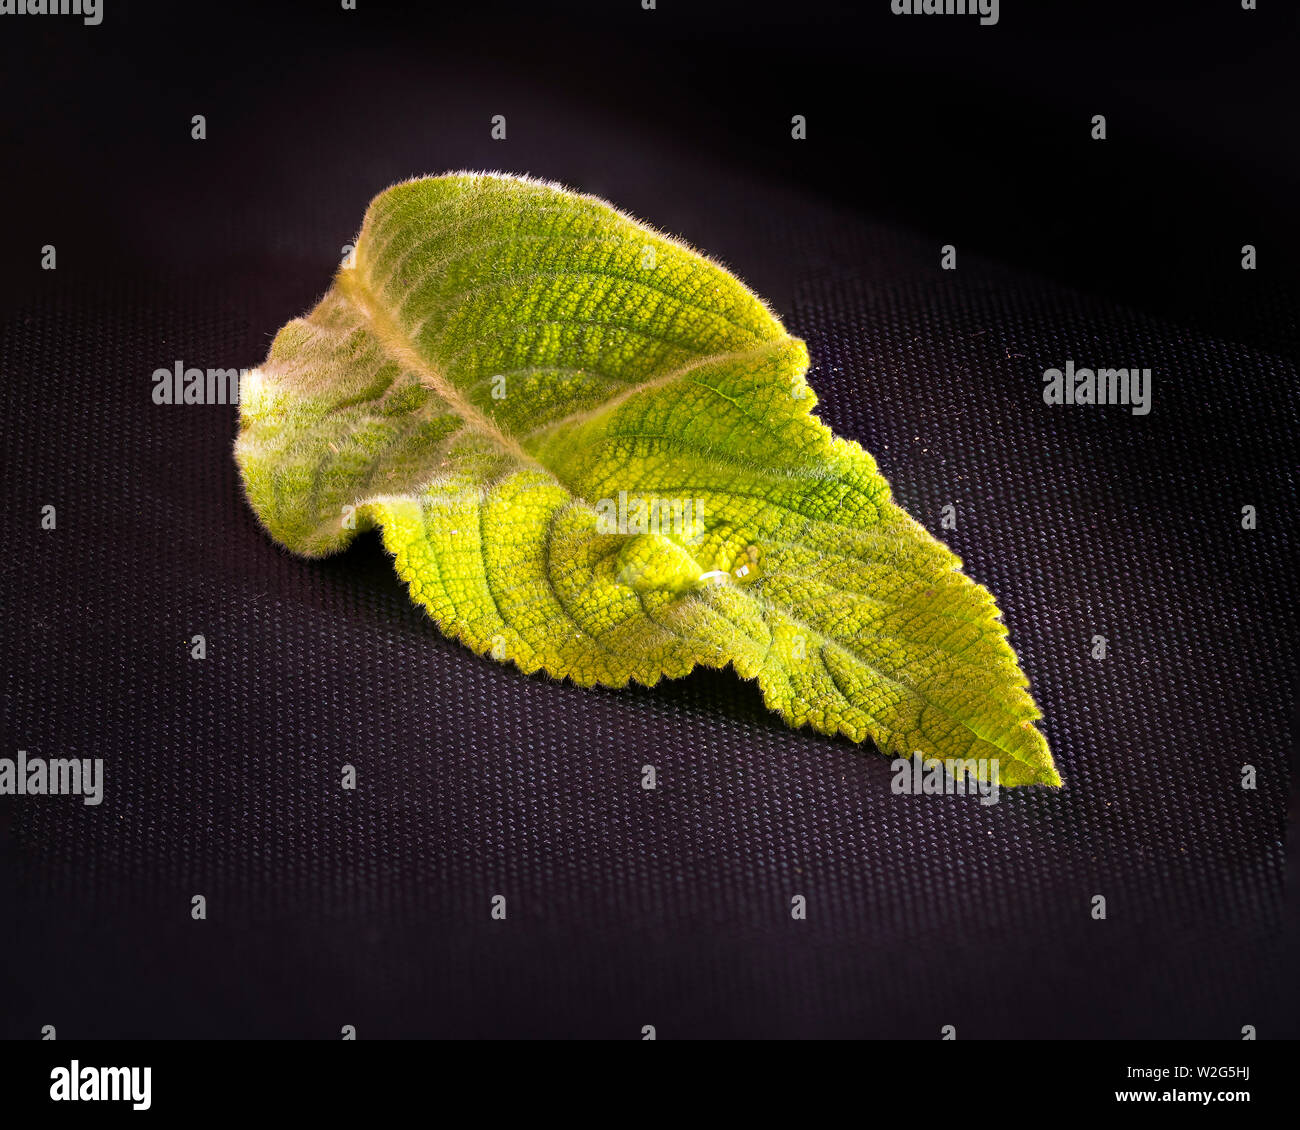 Green leaf with detail texture isolated on a black background Stock Photo